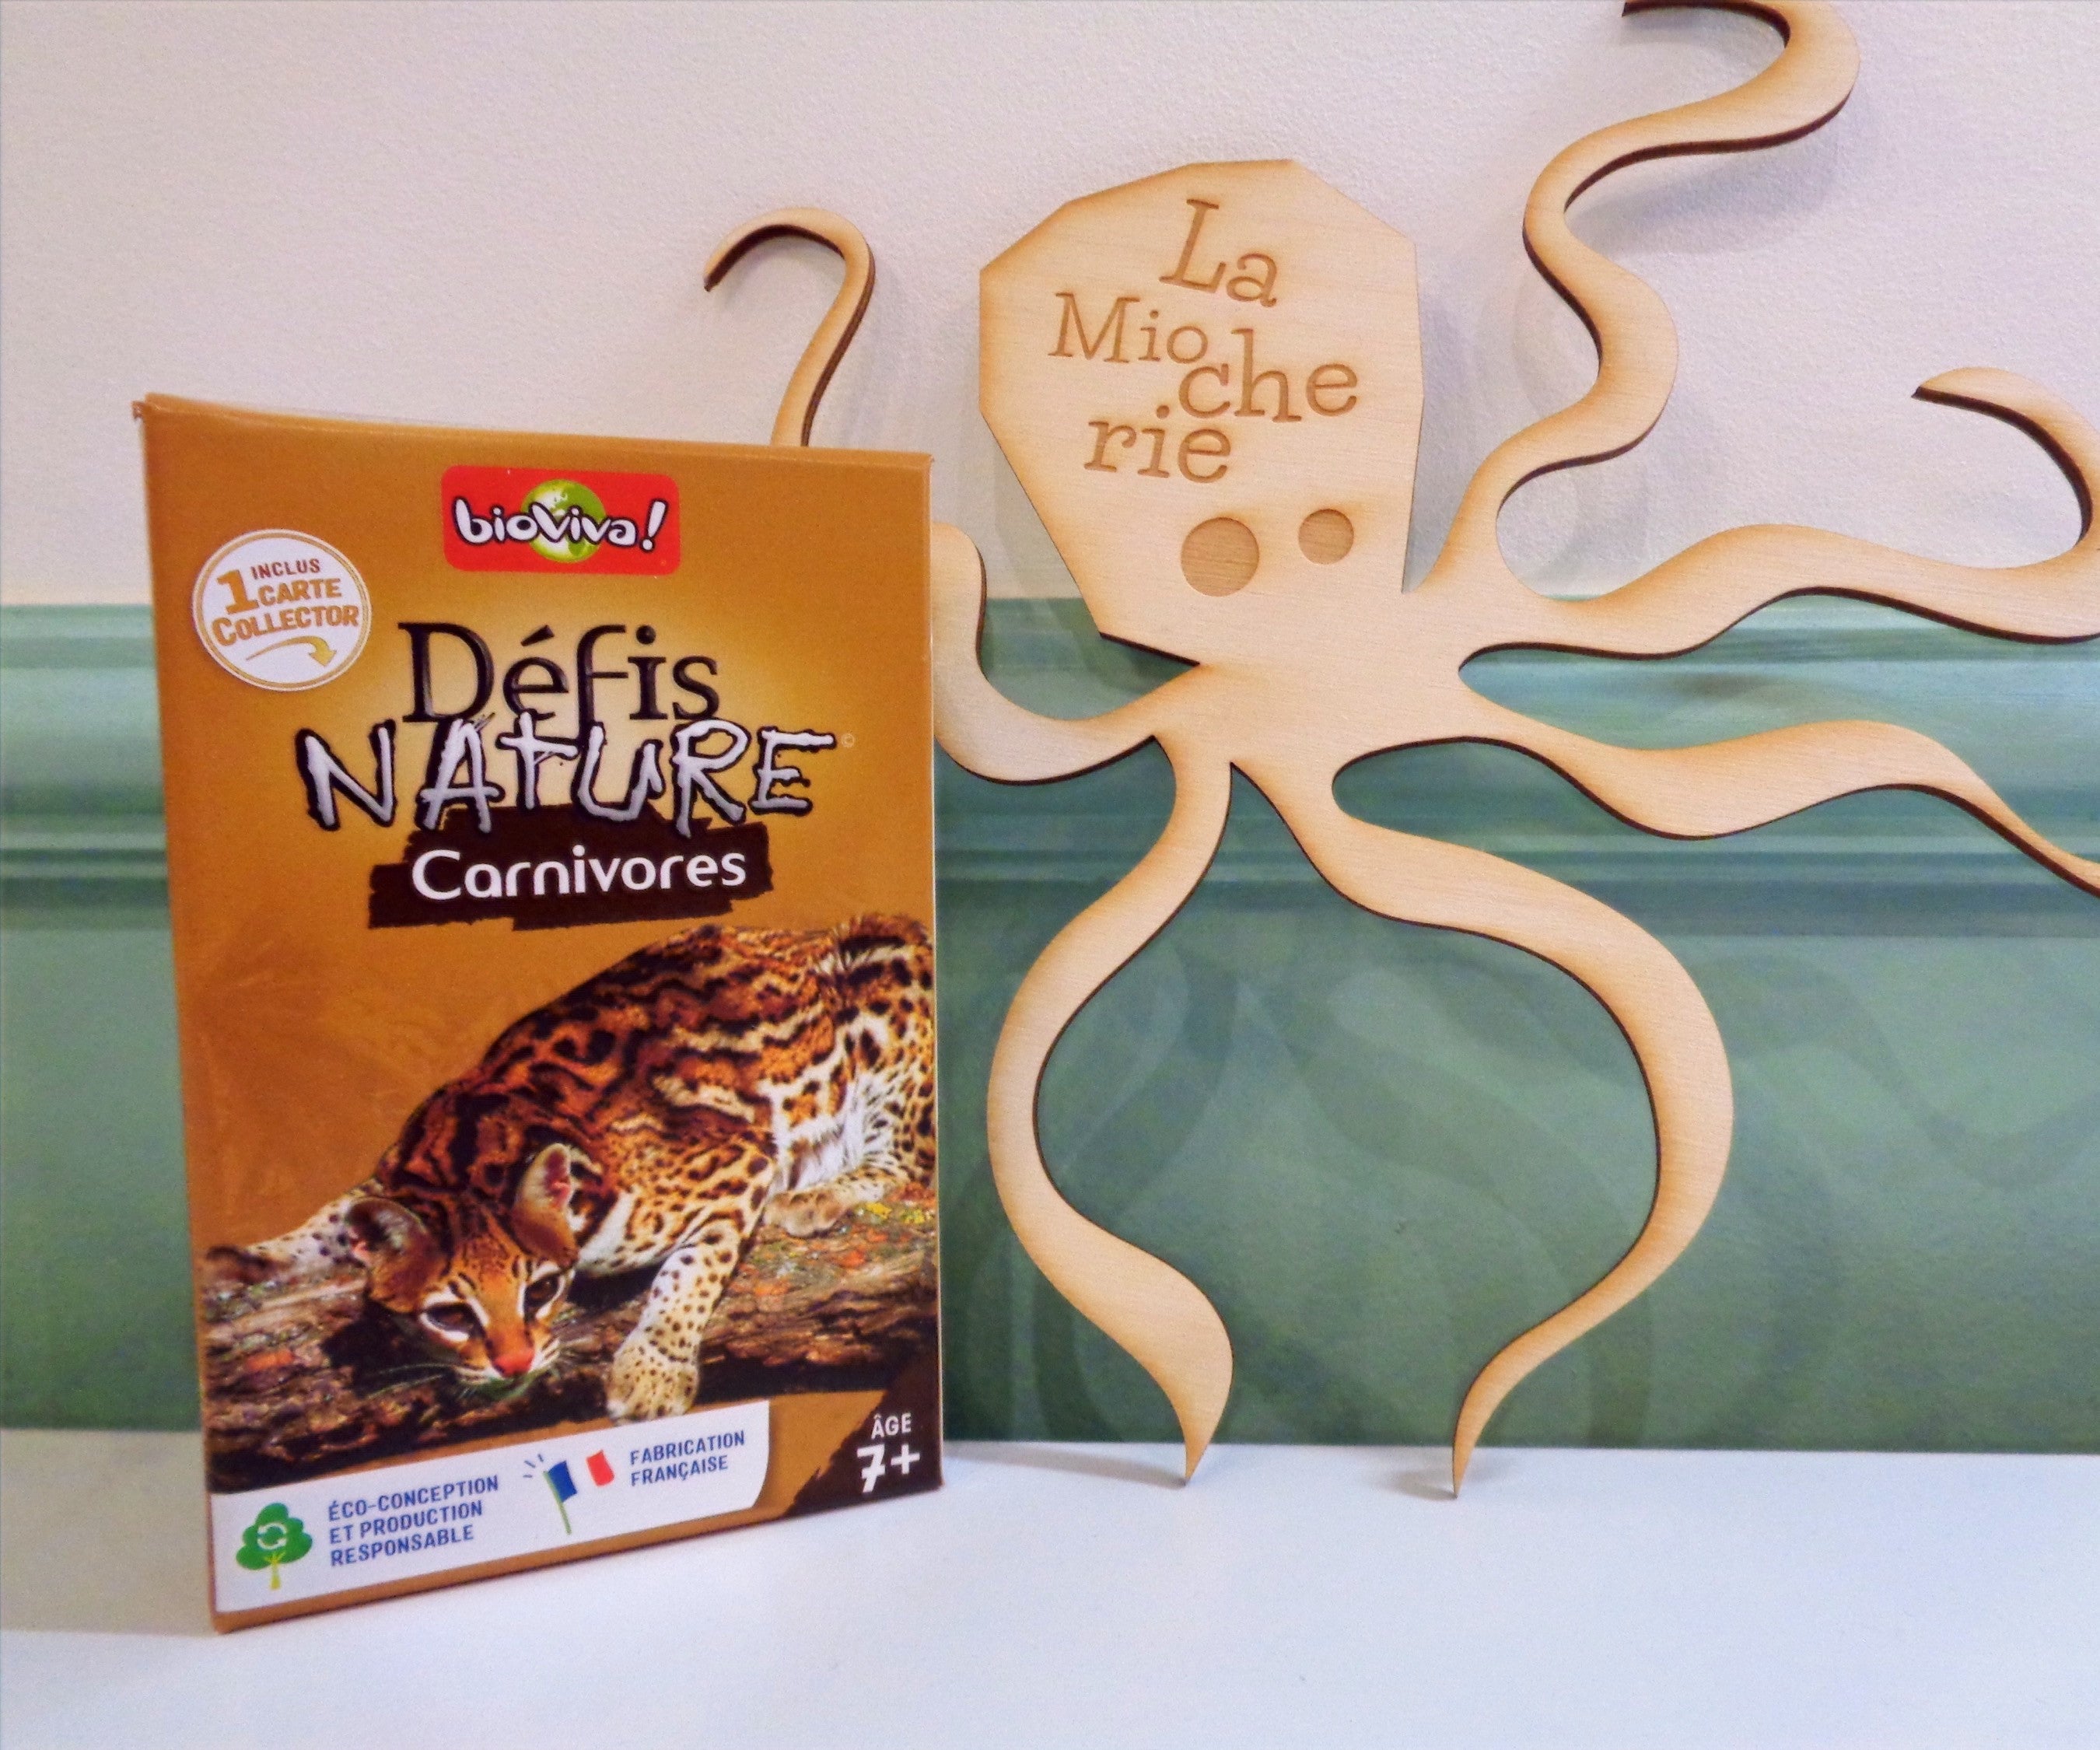 Défis Nature Carnivores - Made in France - Bioviva